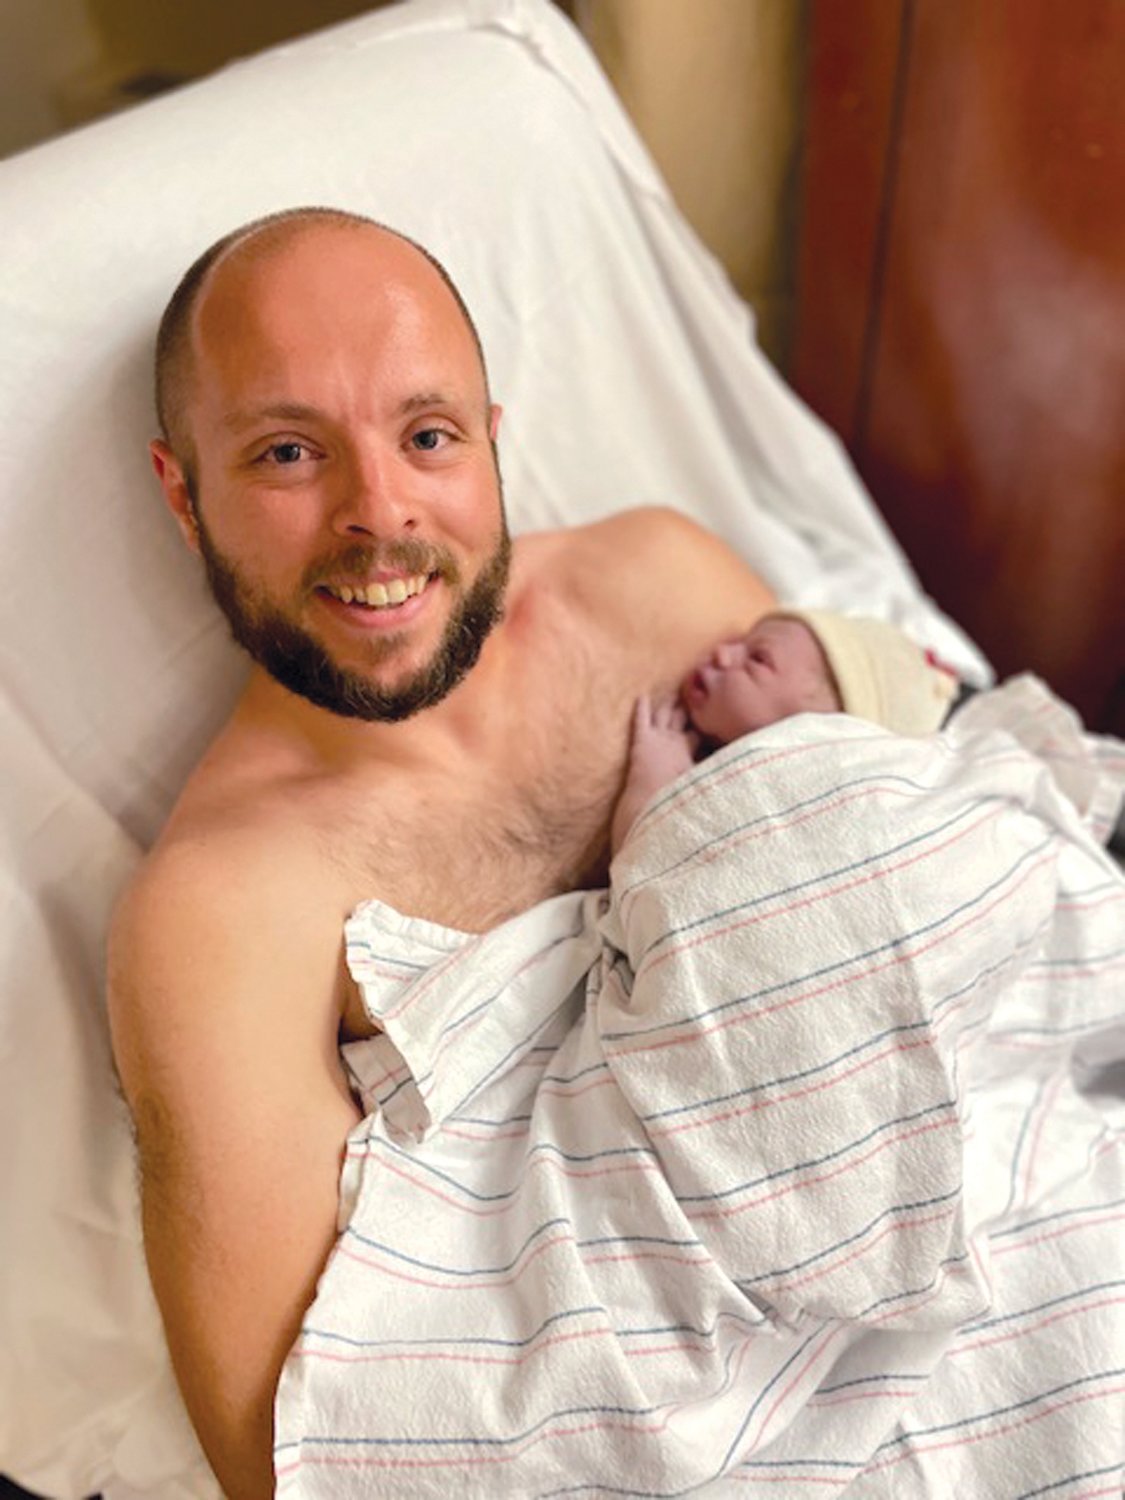 NEW DAD: Herald Sports Editor Alex Sponseller and his wife welcomed their son into the world last week. Wesley Scott Sponseller was born June 14, weighed 6 pounds, 15 ounces and measured 19 inches long.